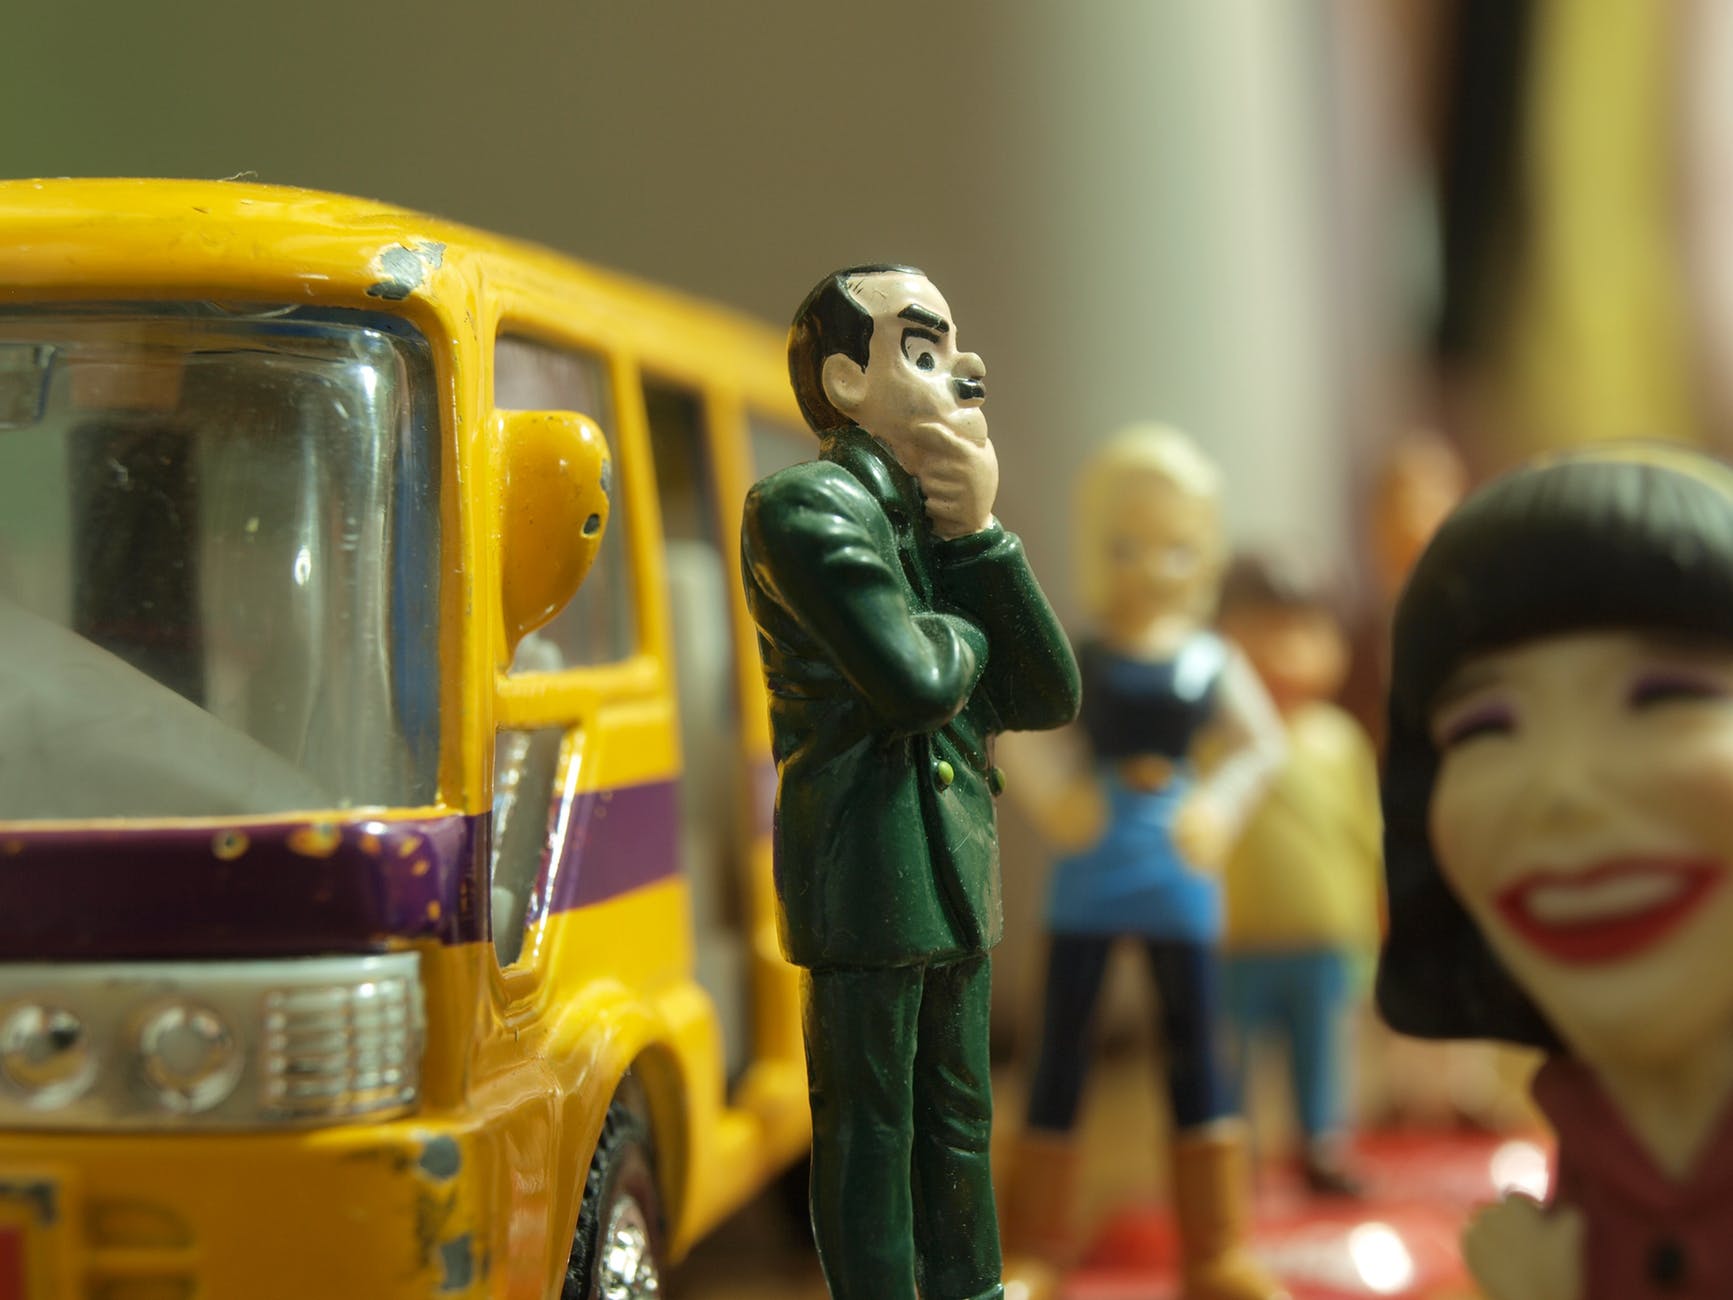 man in green coat figure standing in front of yellow toy bus